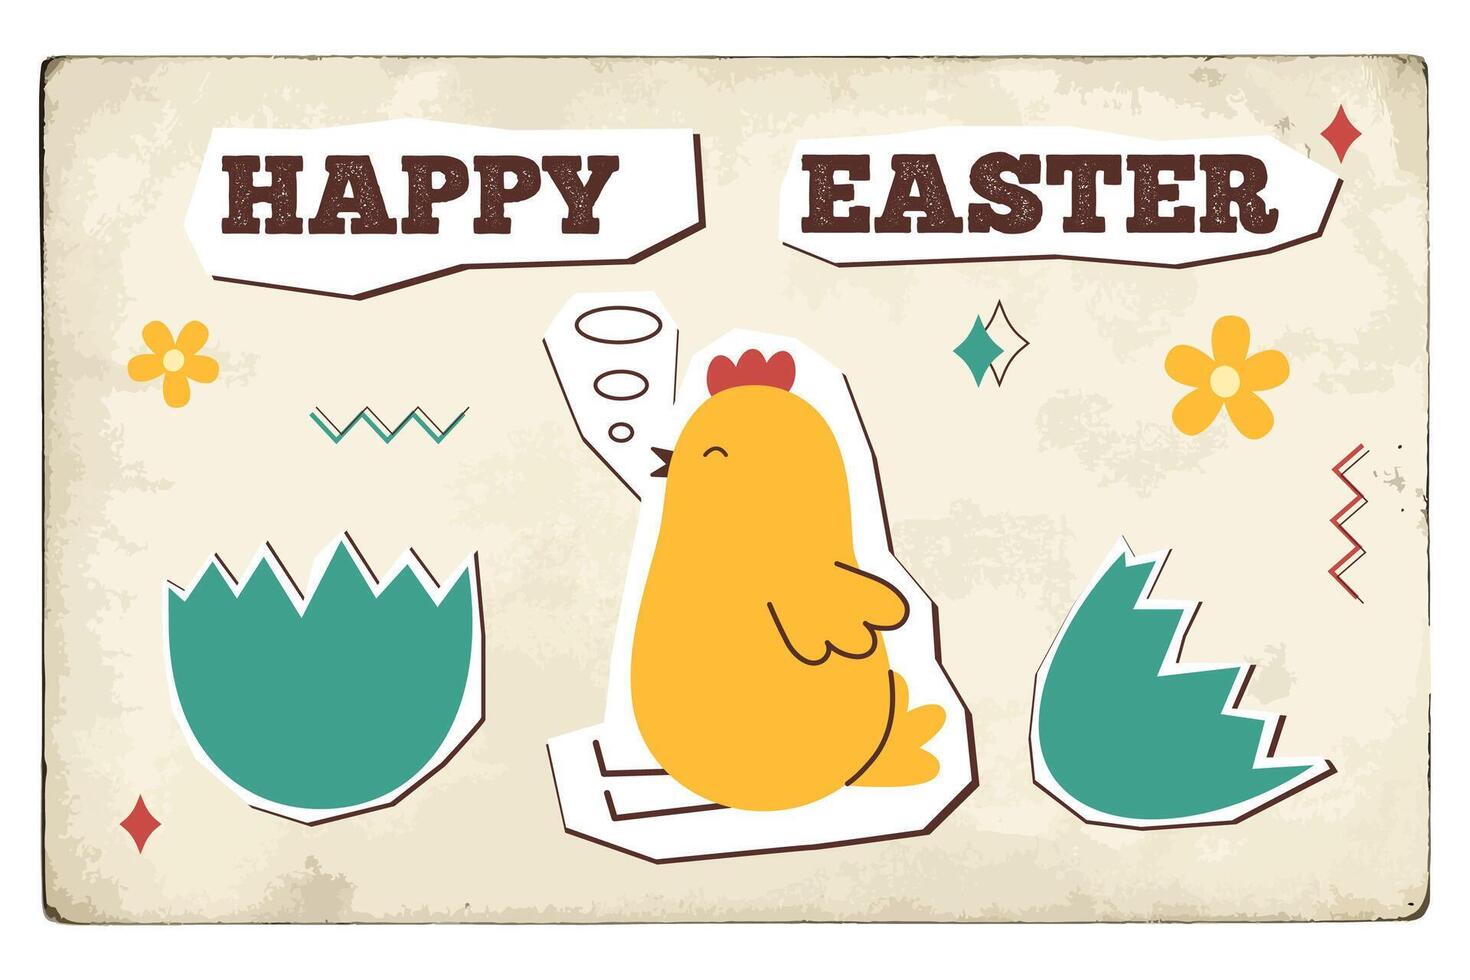 Happy easter card in new nostalgia style. Minimal card designs in retro style, vector illustration template. Old postcard.